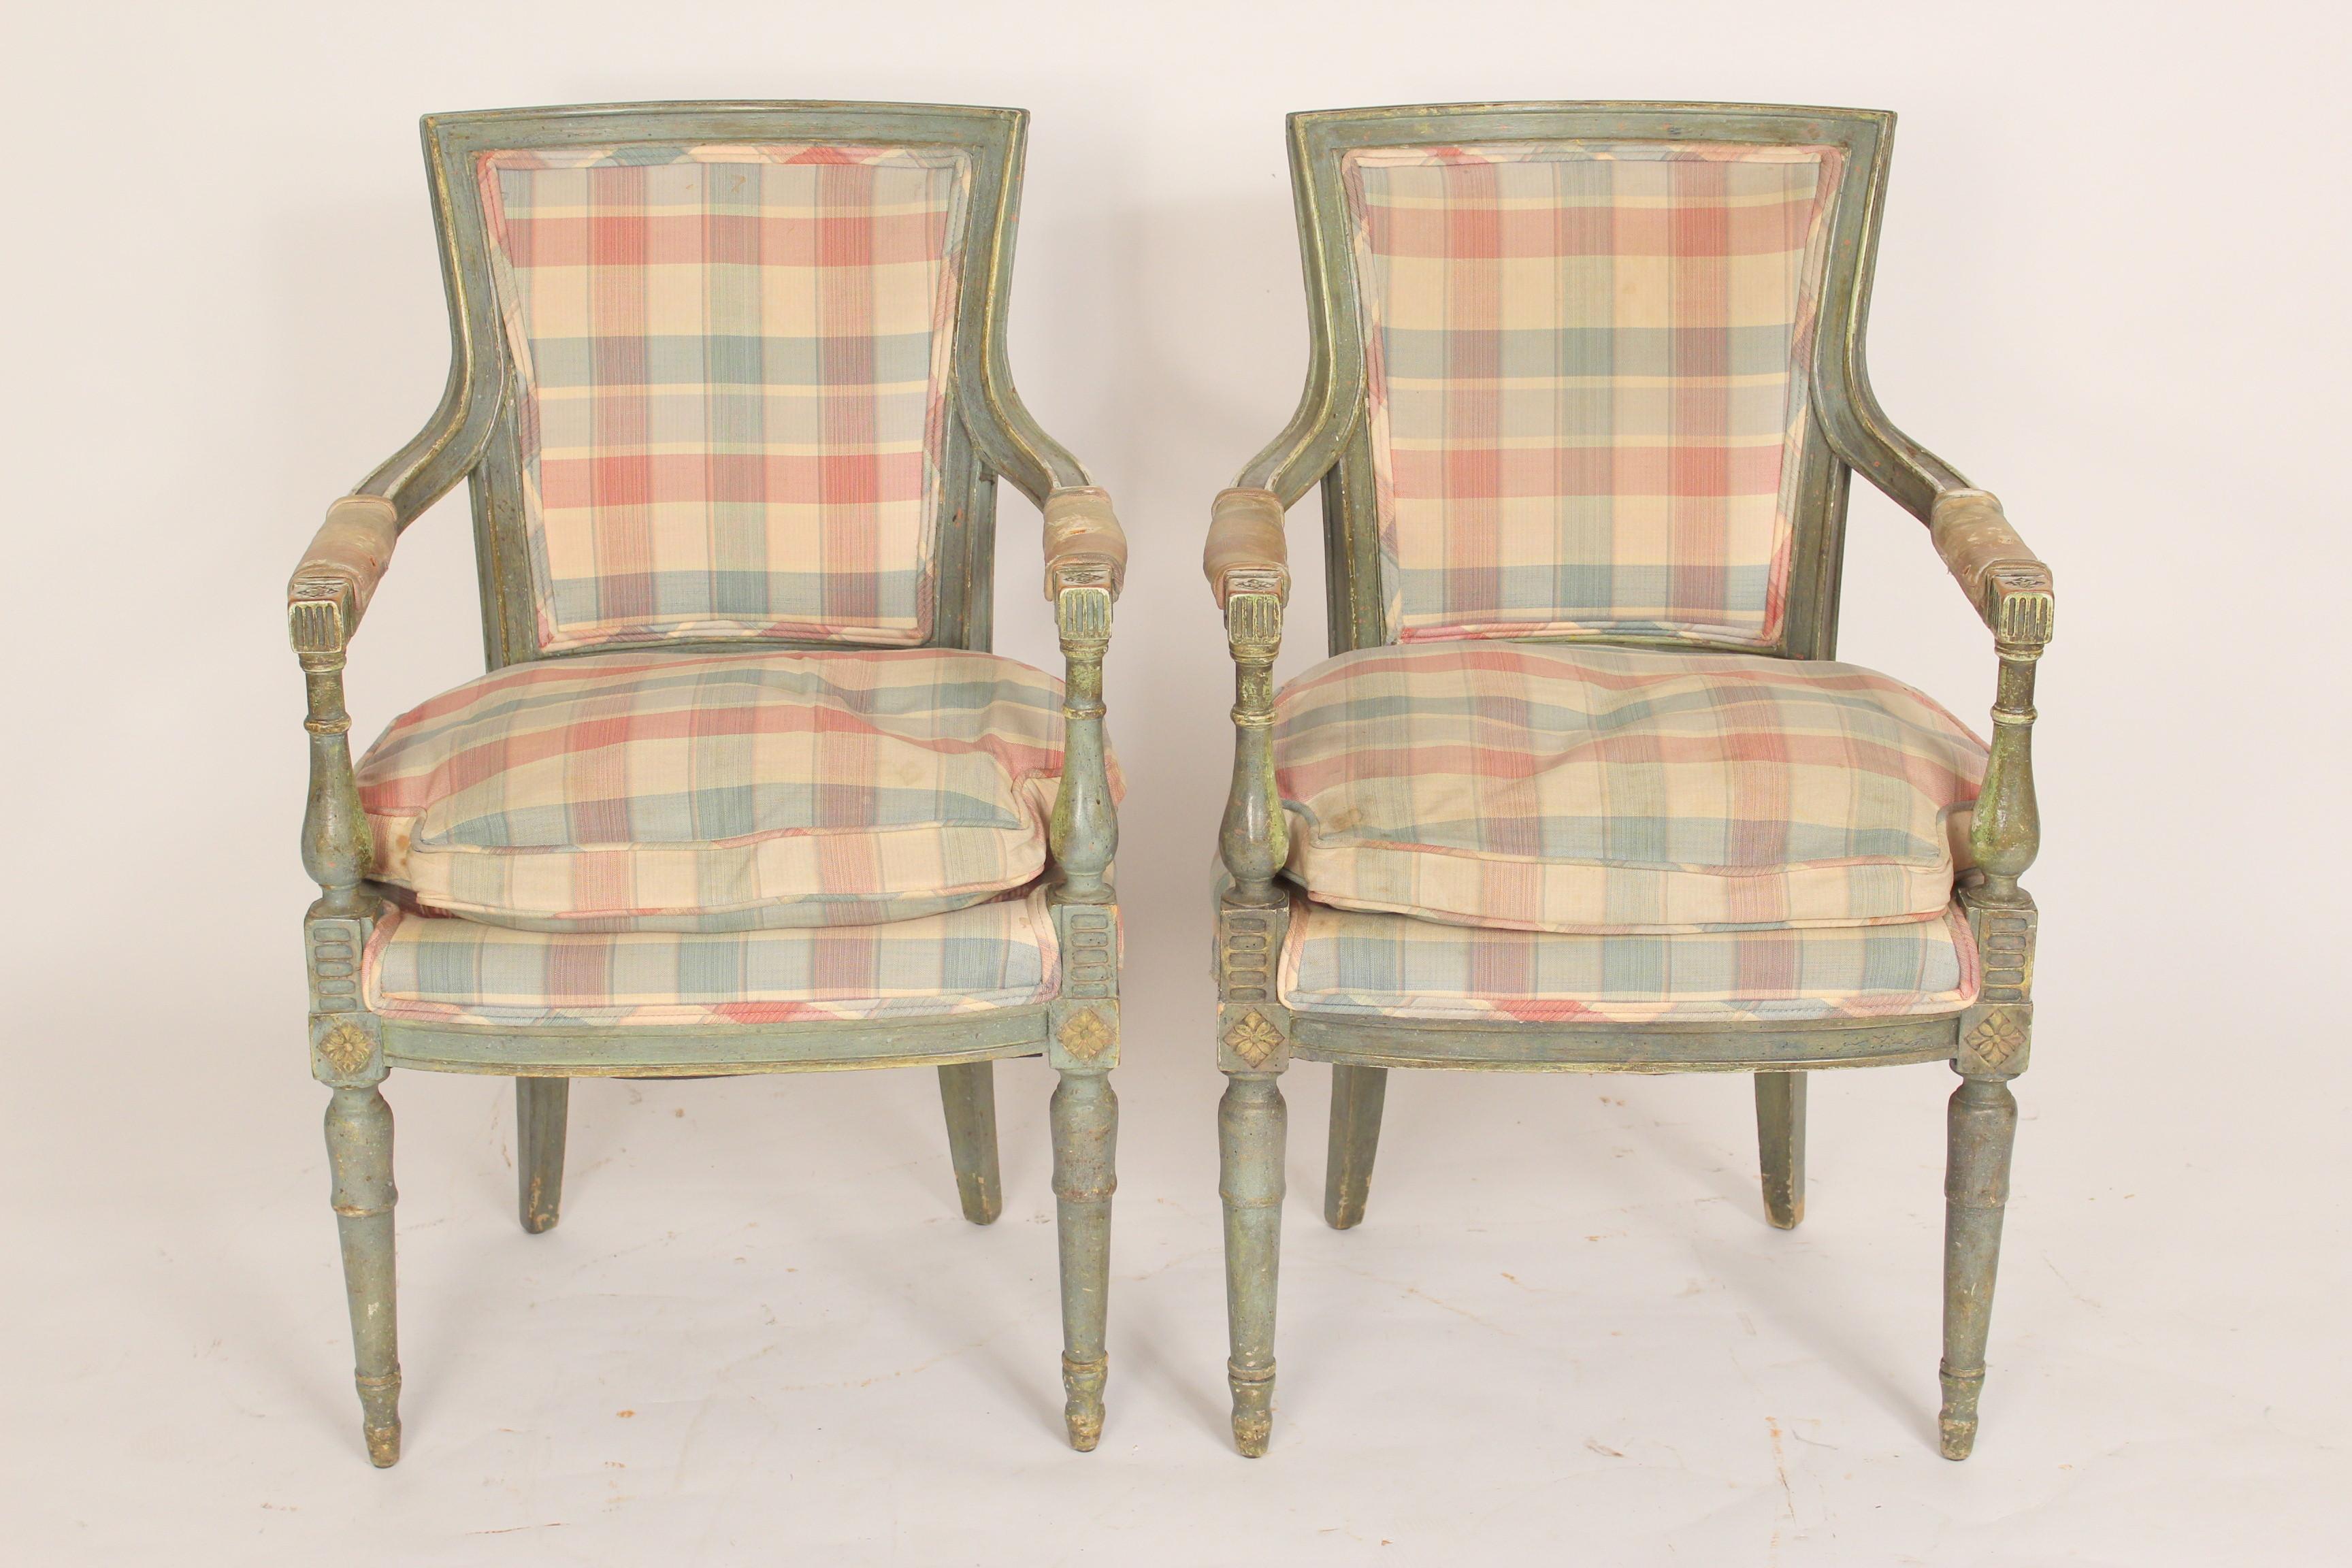 Pair of Louis XVI style painted armchairs, circa 1930's. With original paint.